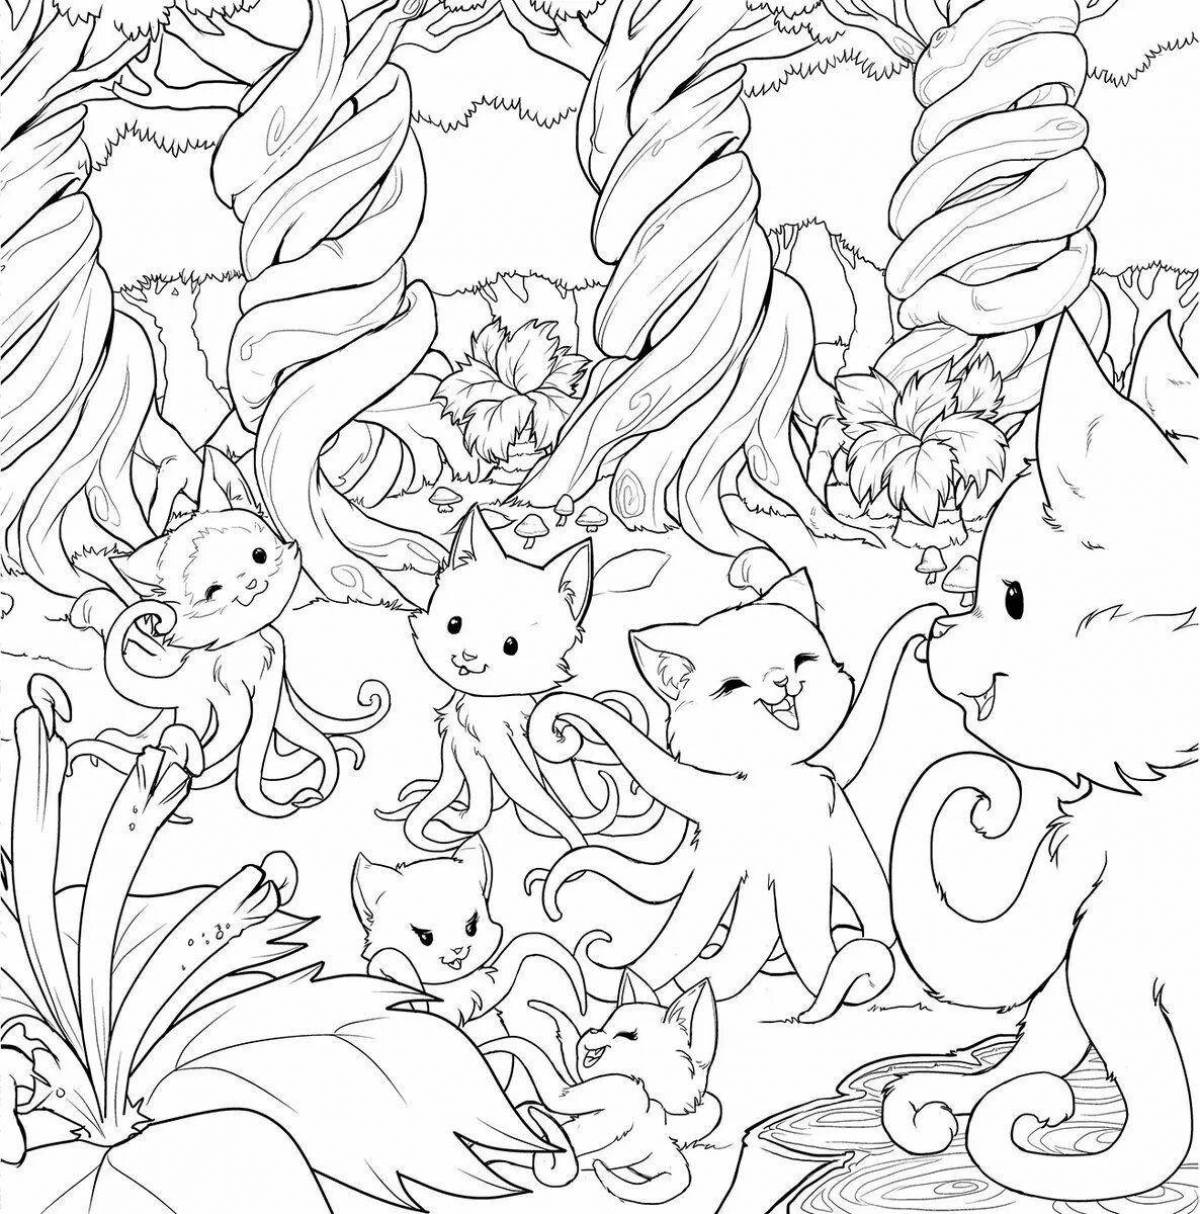 Adorable lost kittens coloring page